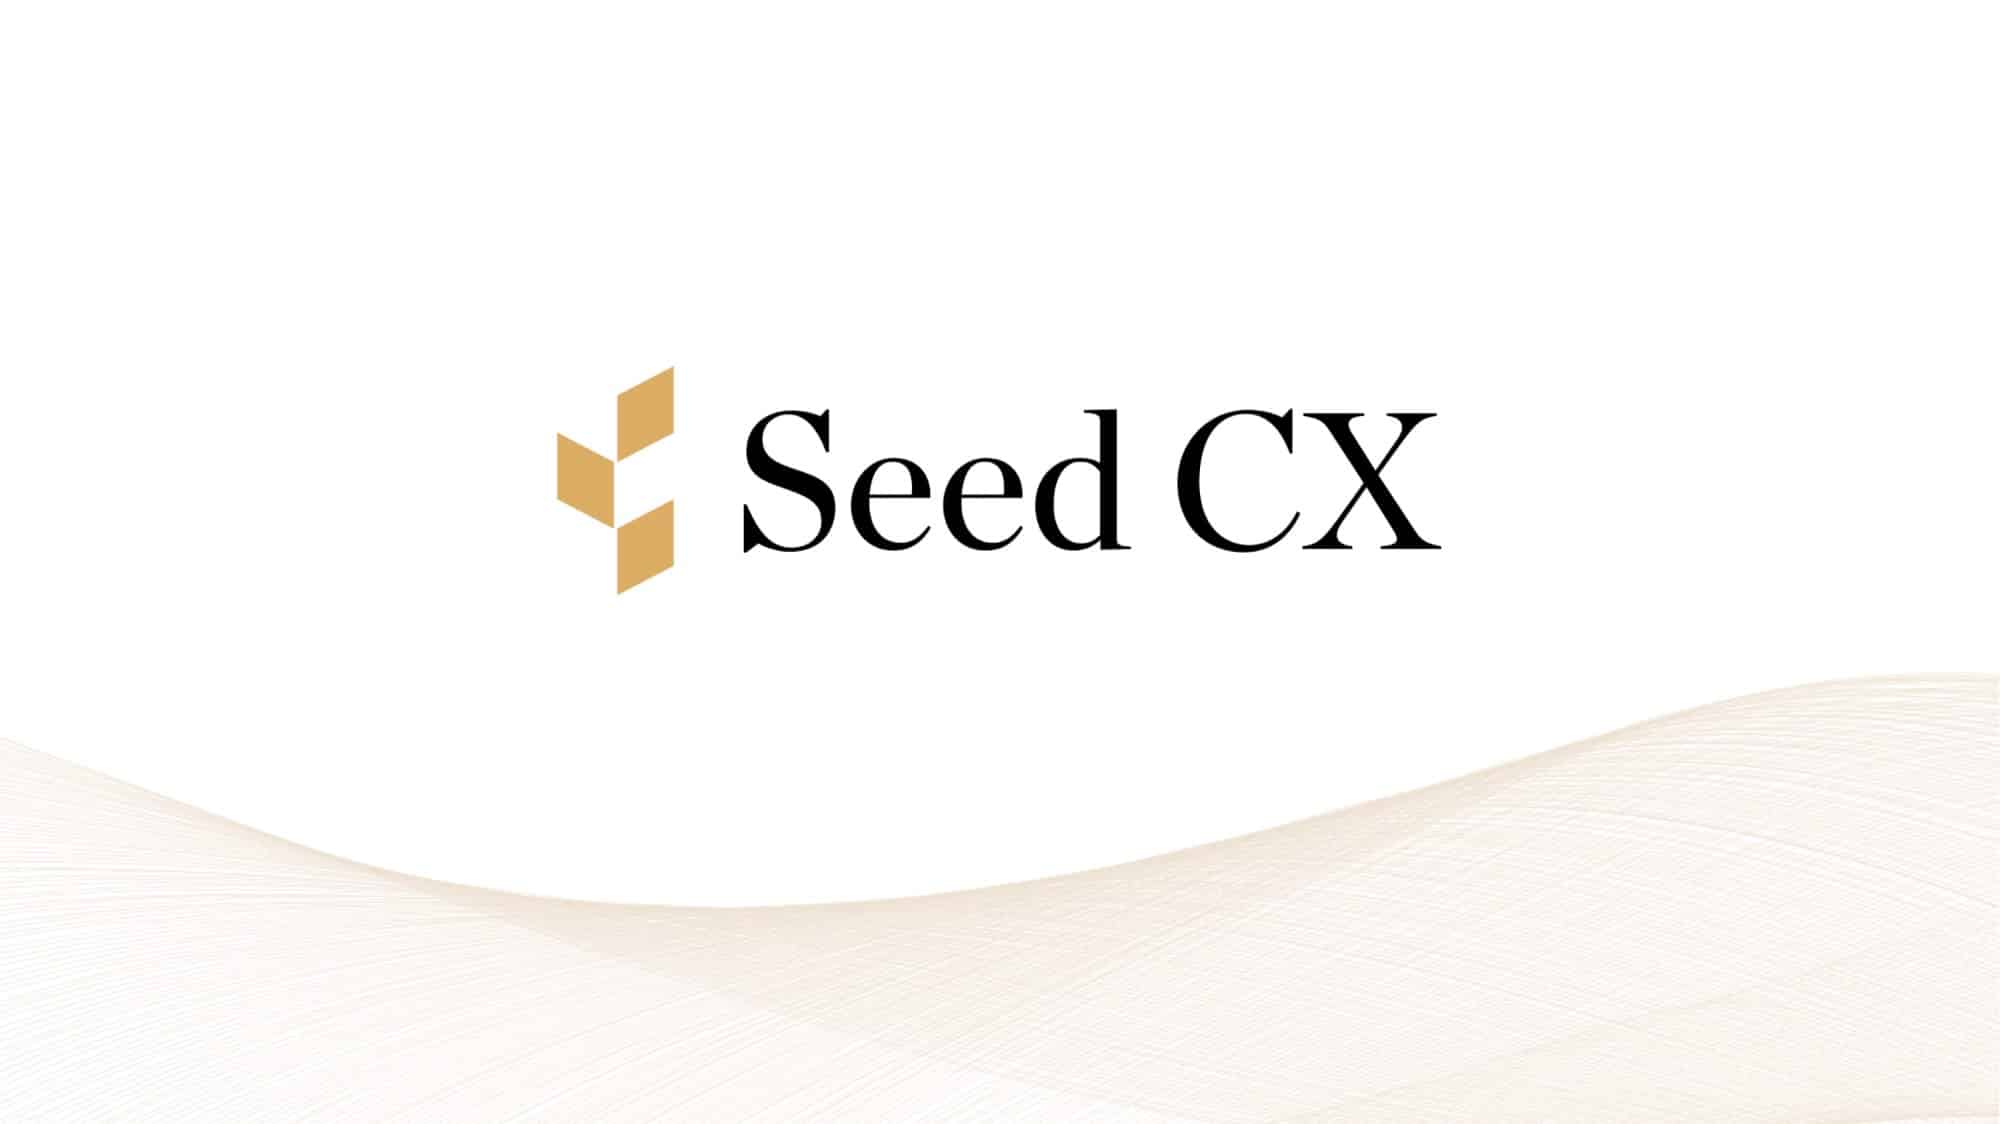 Hydra X Announces its Partnership with Seed CX